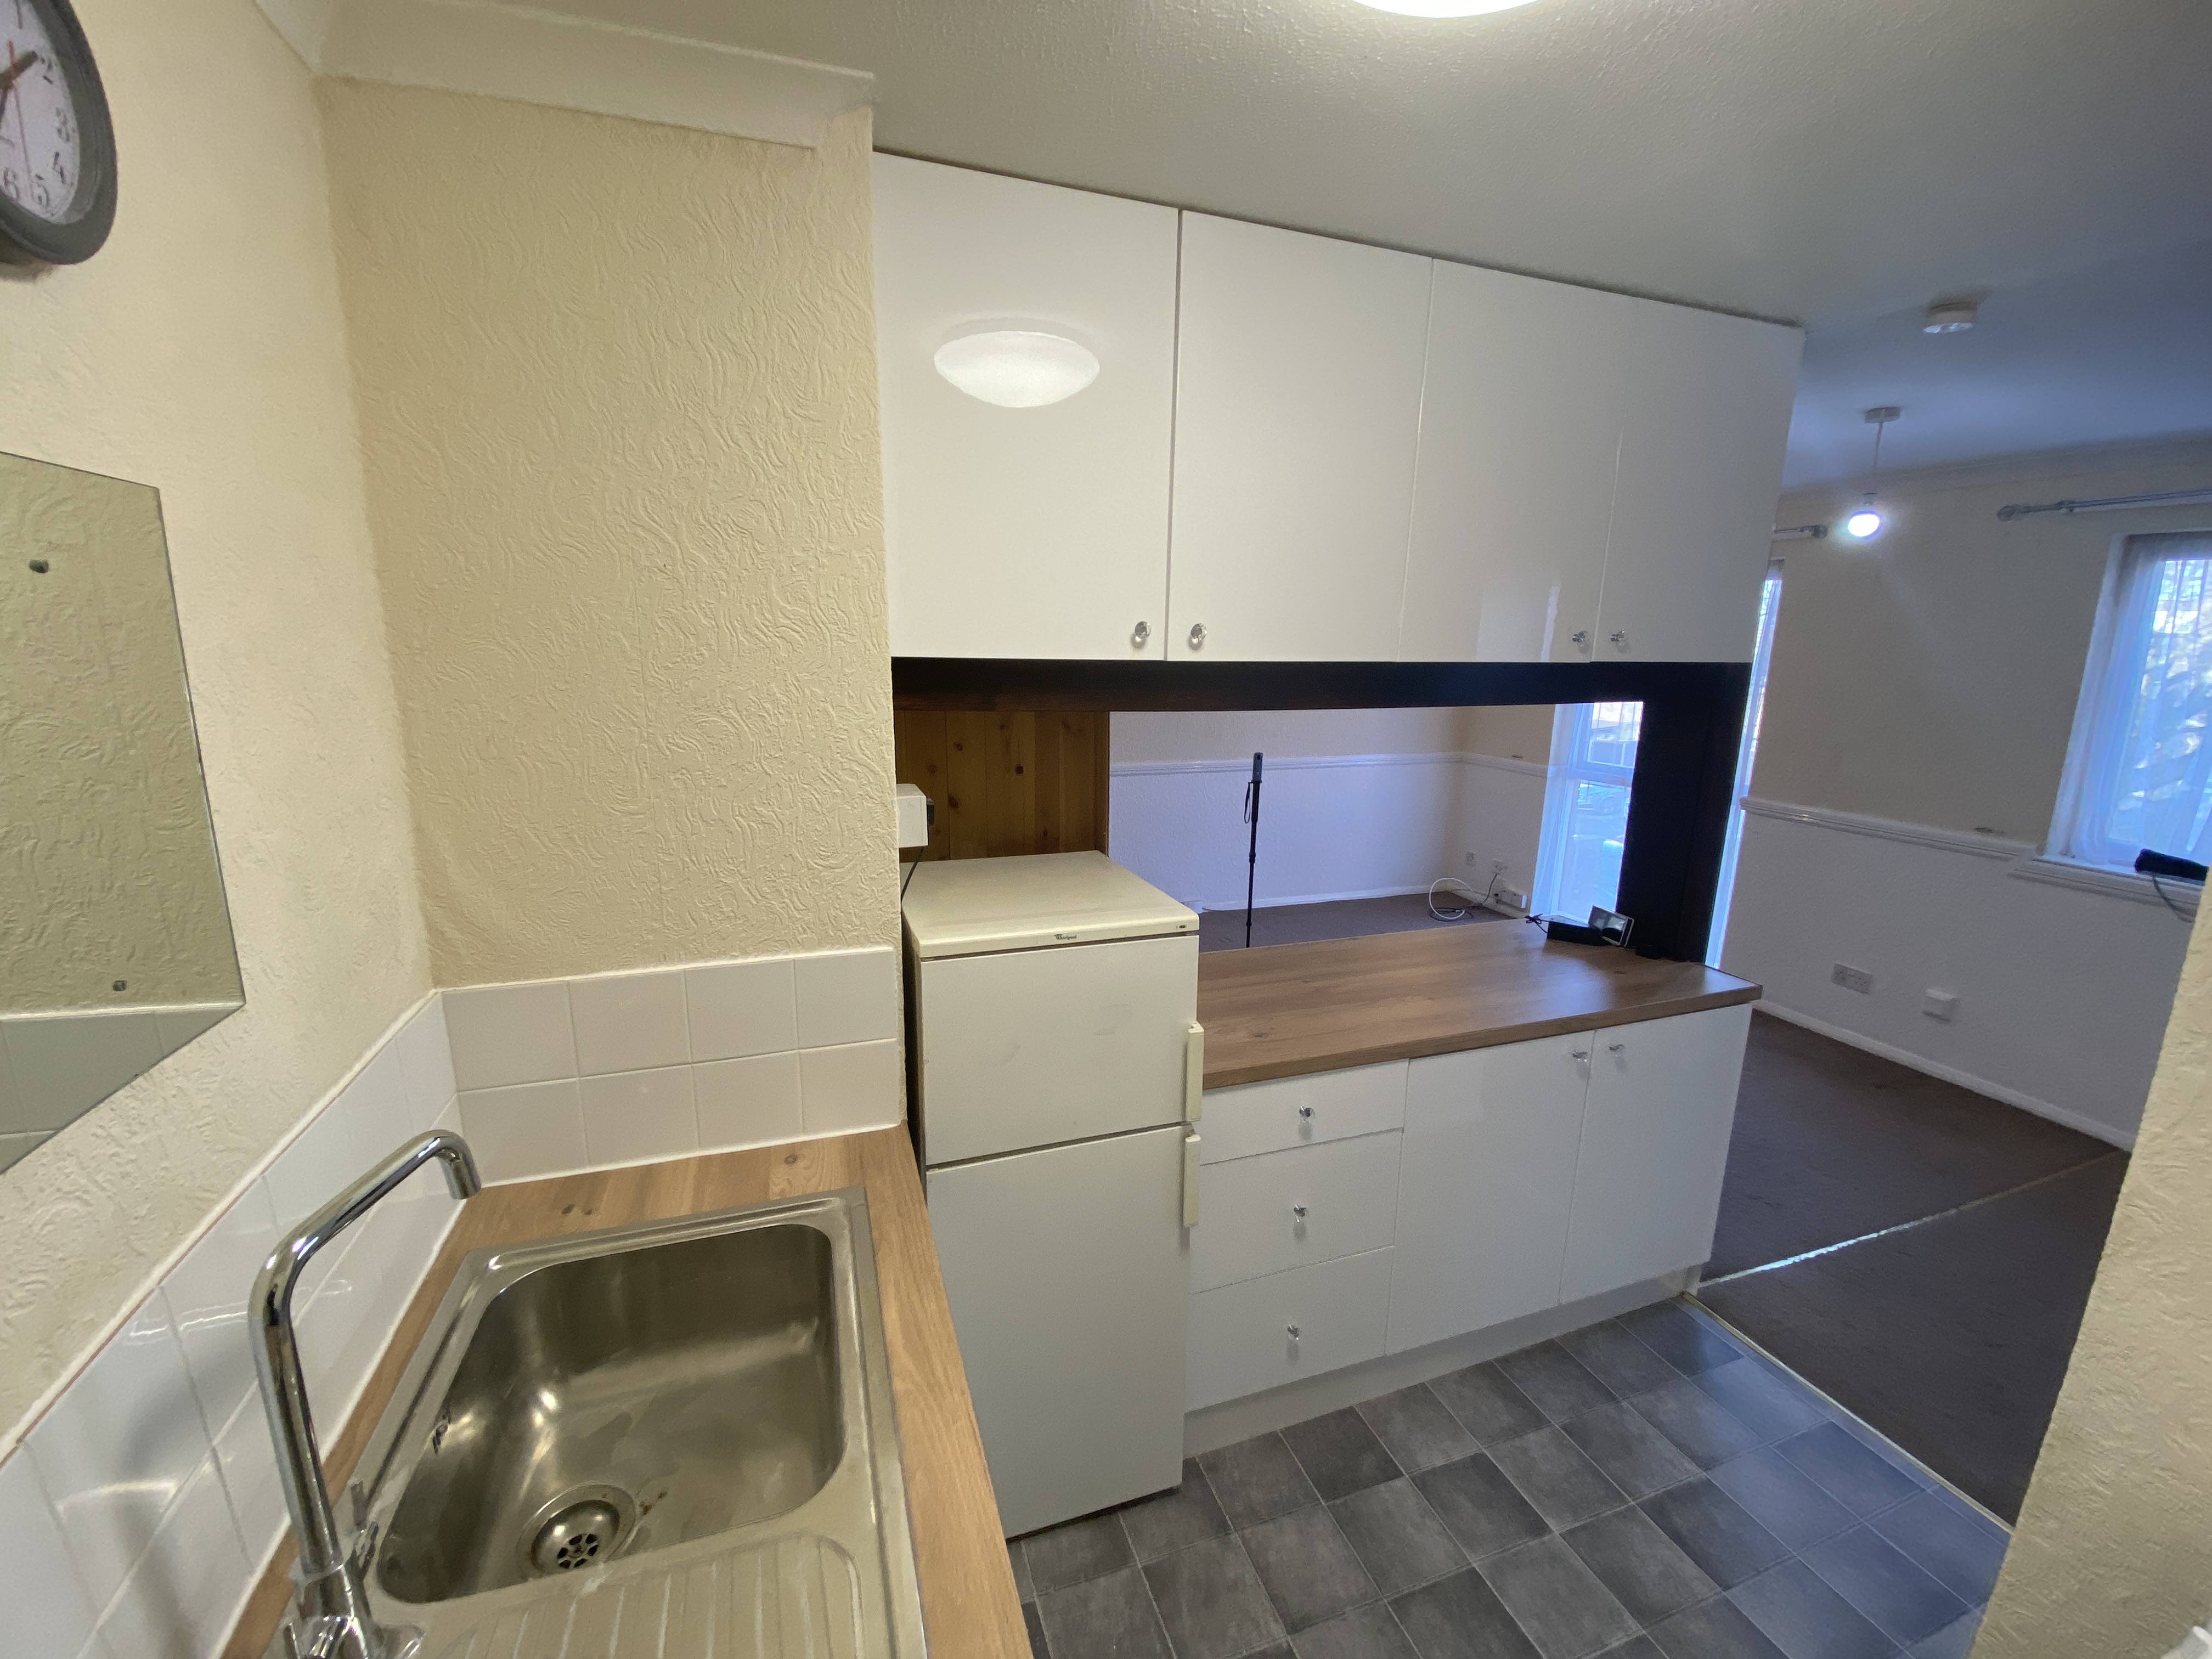 <p>This property is ideal for either a first time buyer or an investor. Tucked away off on one of the side of Taswell Road is this 2 bedroom top floor apartment. This is in an ideal location as it is close to the town centre and train station which has the high speed service into London.</p><p><br/><br/></p><p>The living area is open planned, with the kitchen having a breakfast bar area. There is plenty of storage space within the apartment, the bedrooms at the back of the flat with the bathroom in the middle of flat.</p><p><br/><br/></p><p>If you are looking to buy the property as an investment you would be expecting a yield of nearly 6% with the rental expected around £800 a month.<span >﻿</span></p>